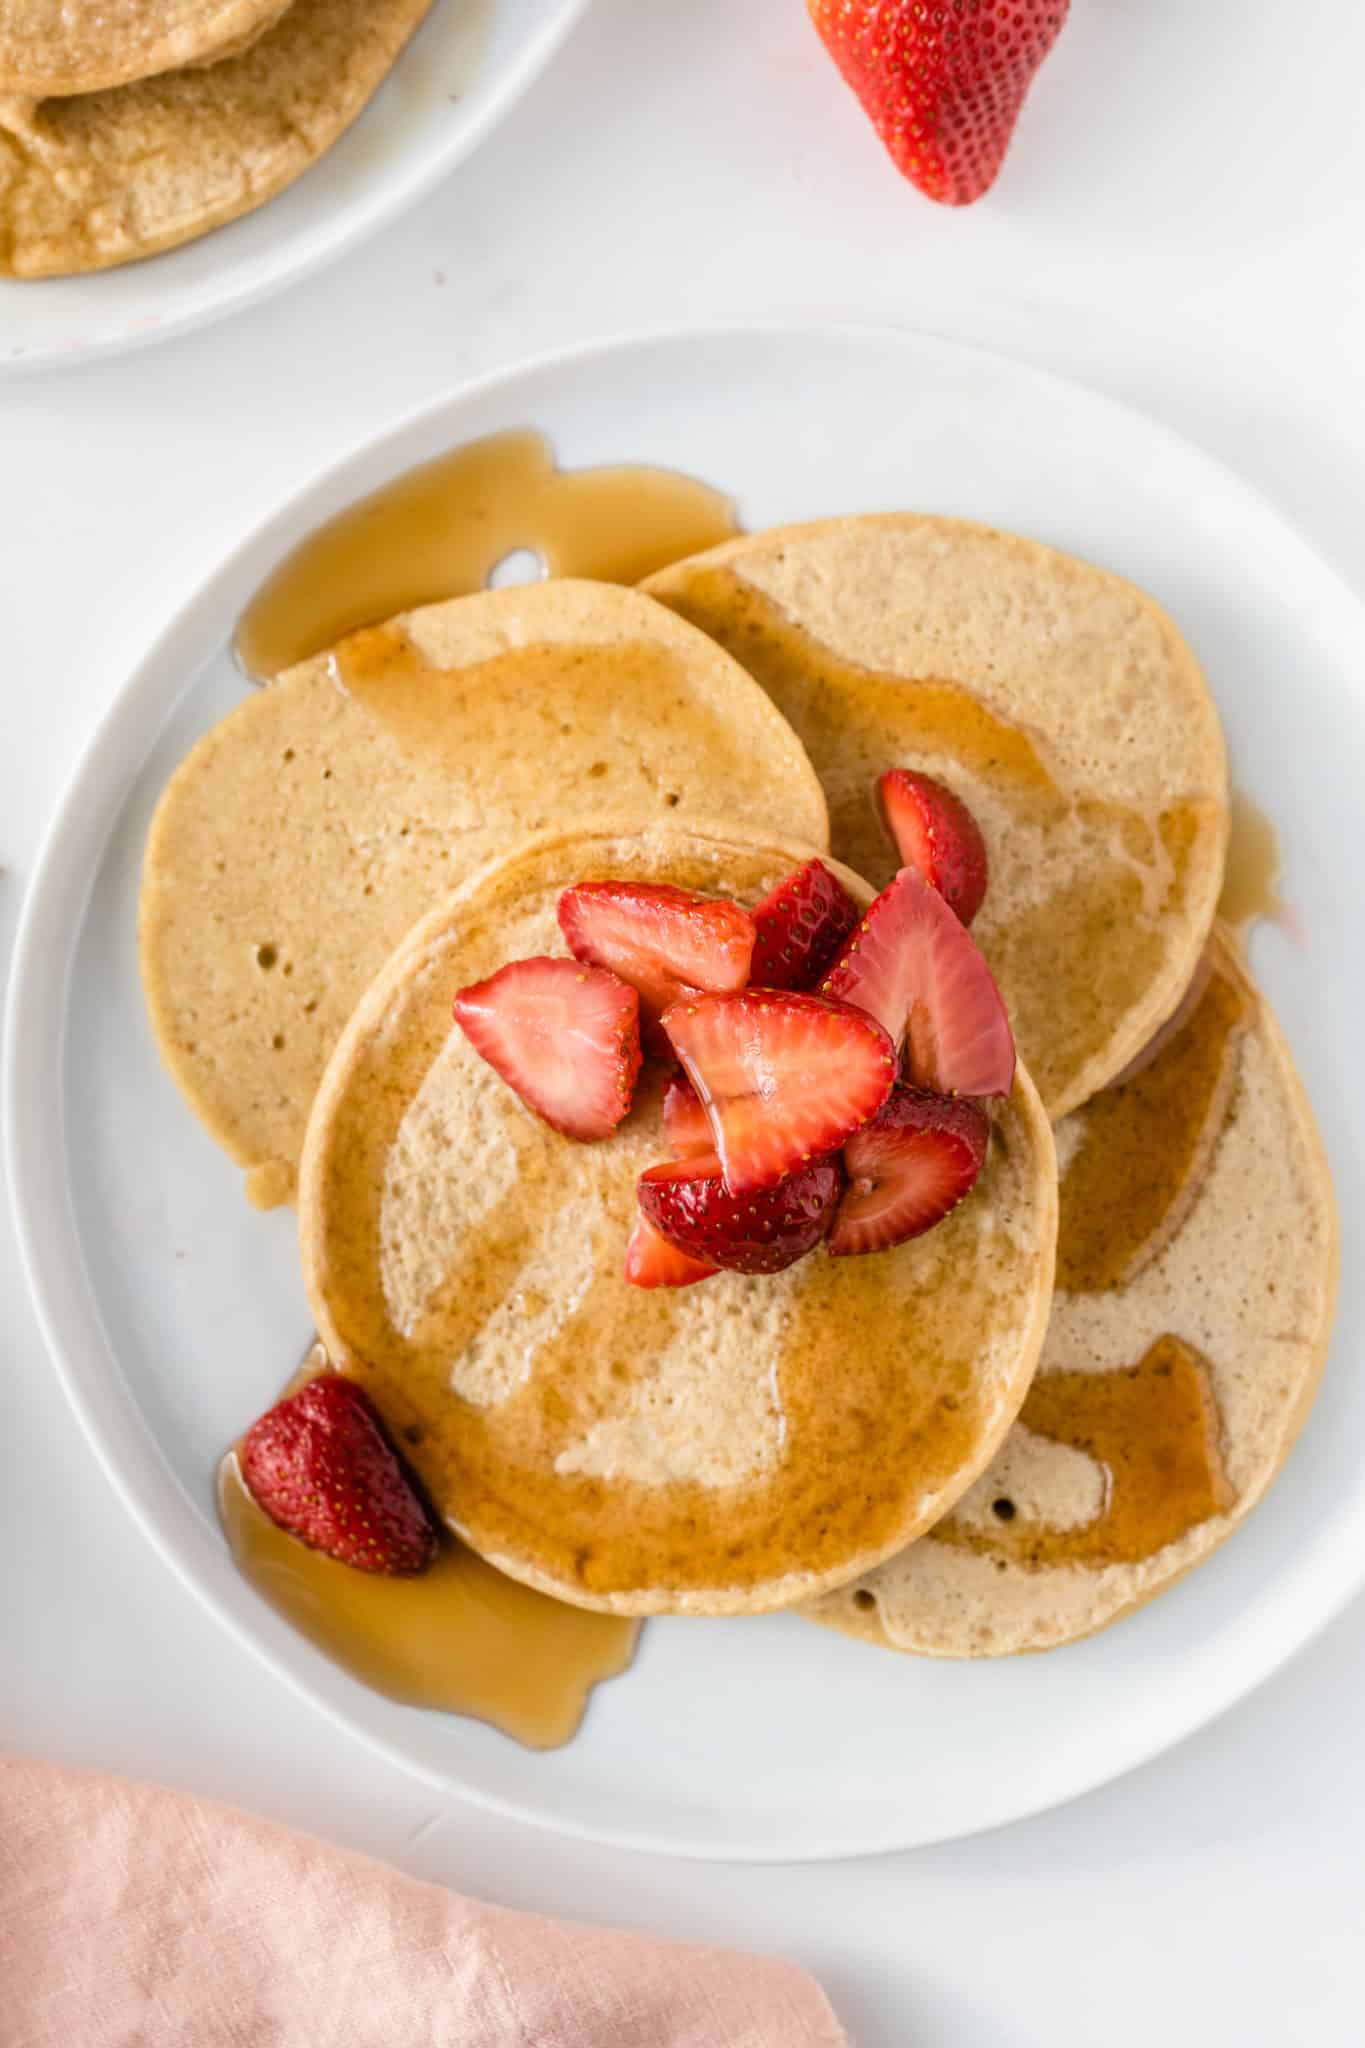 Gluten free pancakes with strawberries and syrup